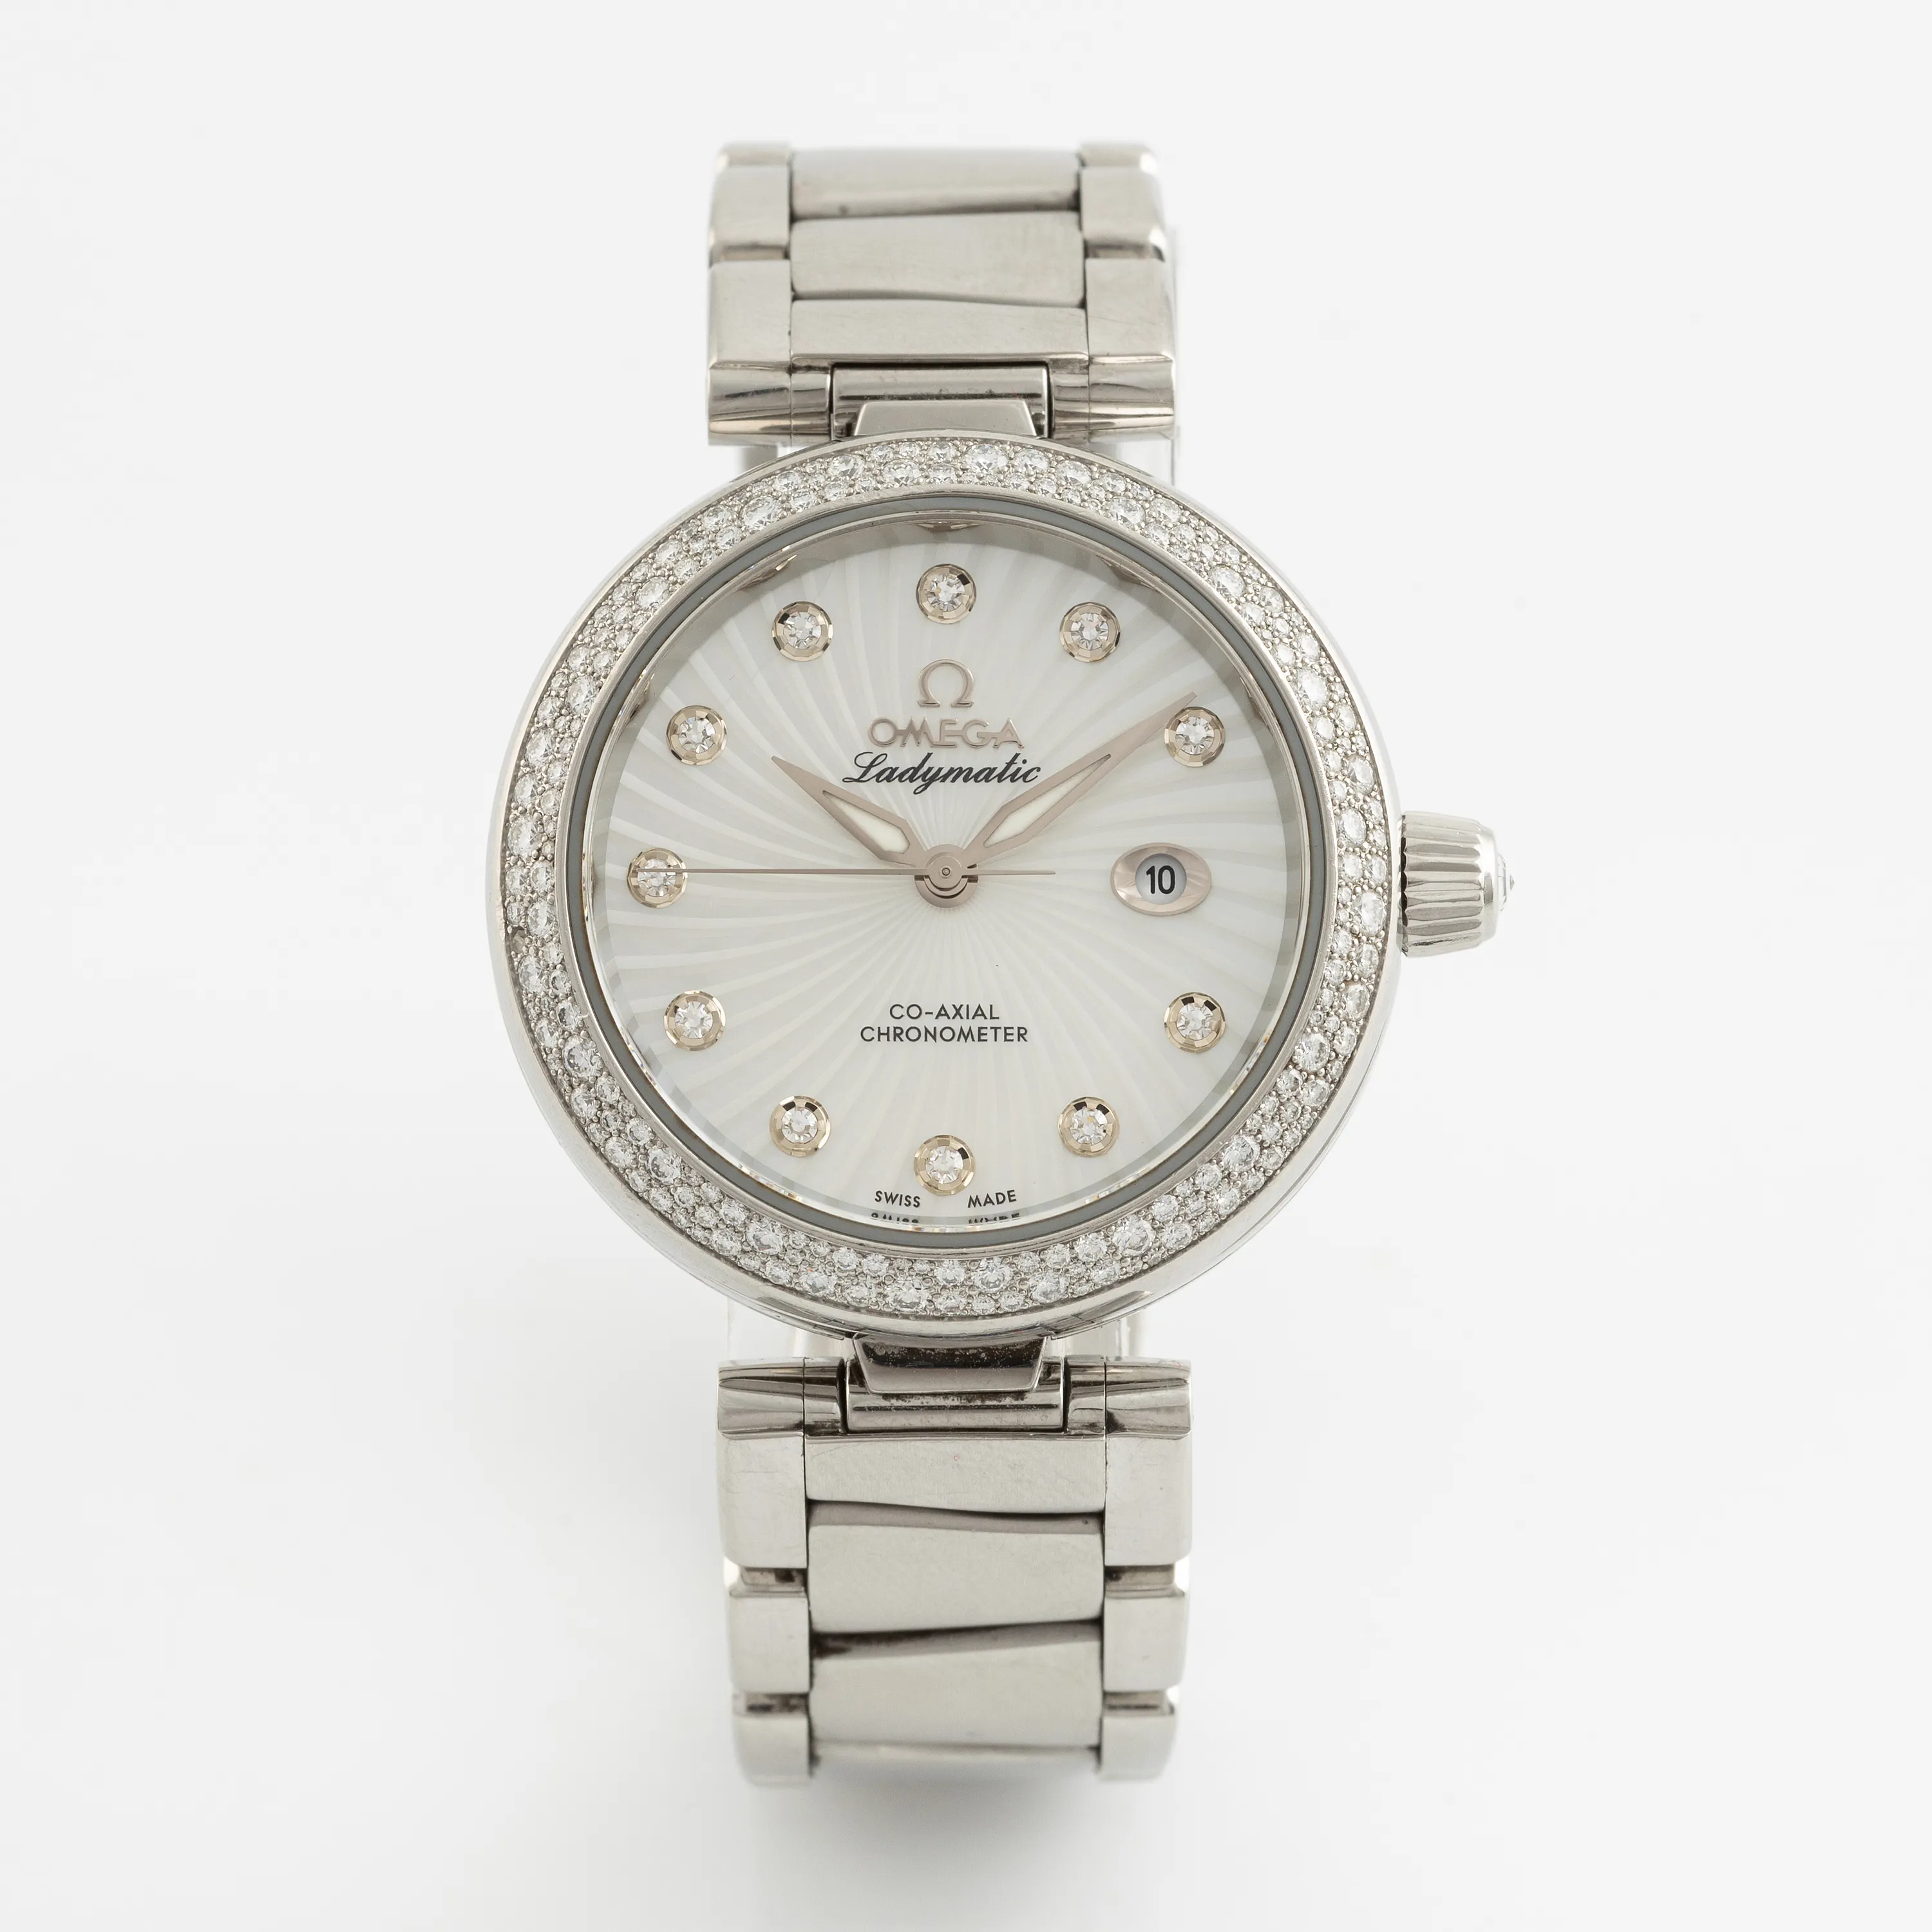 Omega Ladymatic 425.35.34.20.55.001 34mm Stainless steel Mother-of-pearl